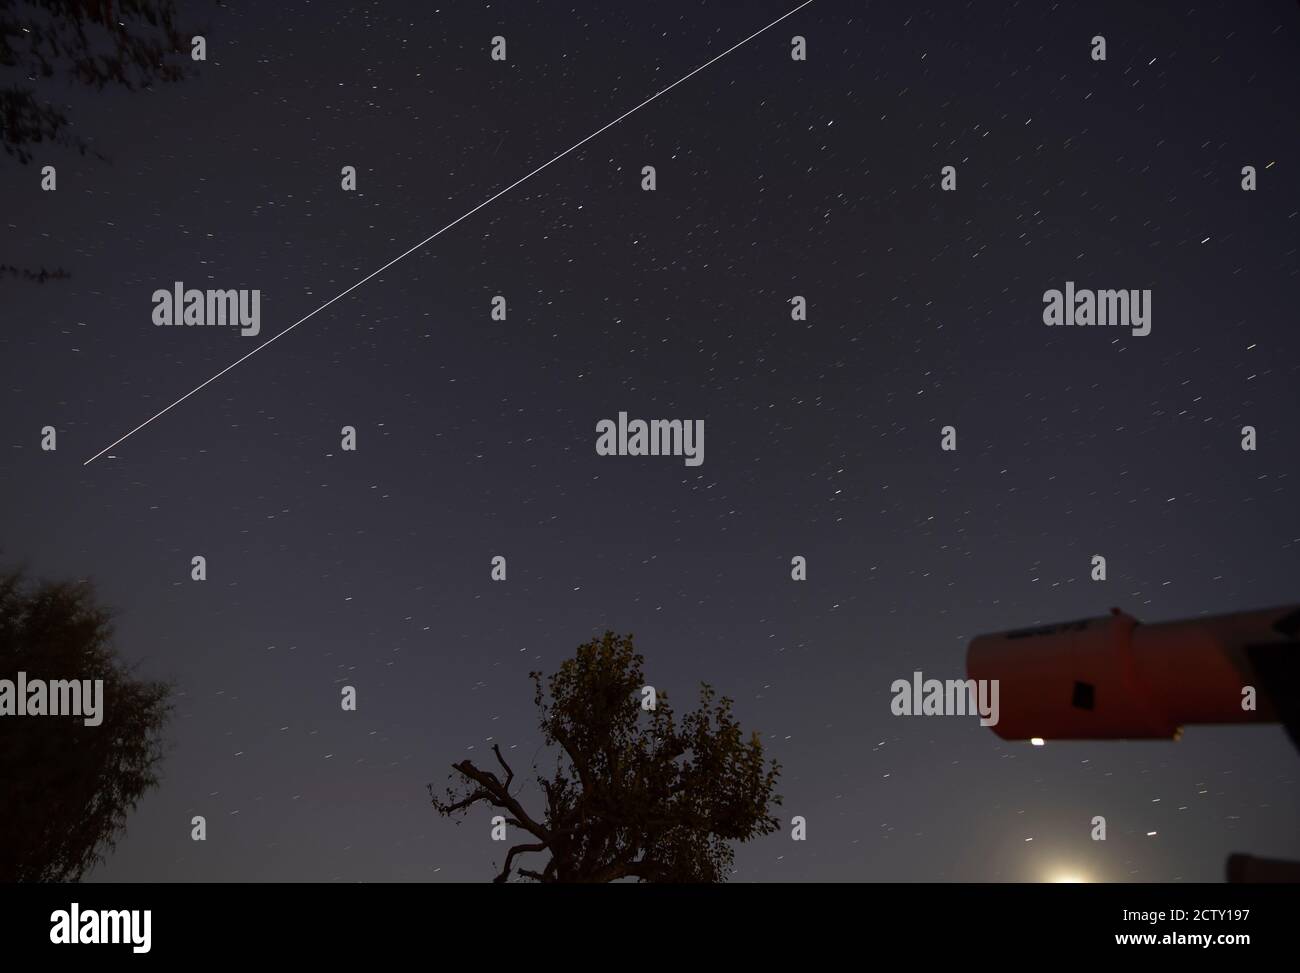 London, UK. 25 September 2020. The bright track of the International Space Station flies over London from west to east in starry sky. A telescope in the lower right sits above the glare of the Moon with bright trails of the planets Saturn and Jupiter directly above to left and right. Credit: Malcolm Park/Alamy Live News. Stock Photo